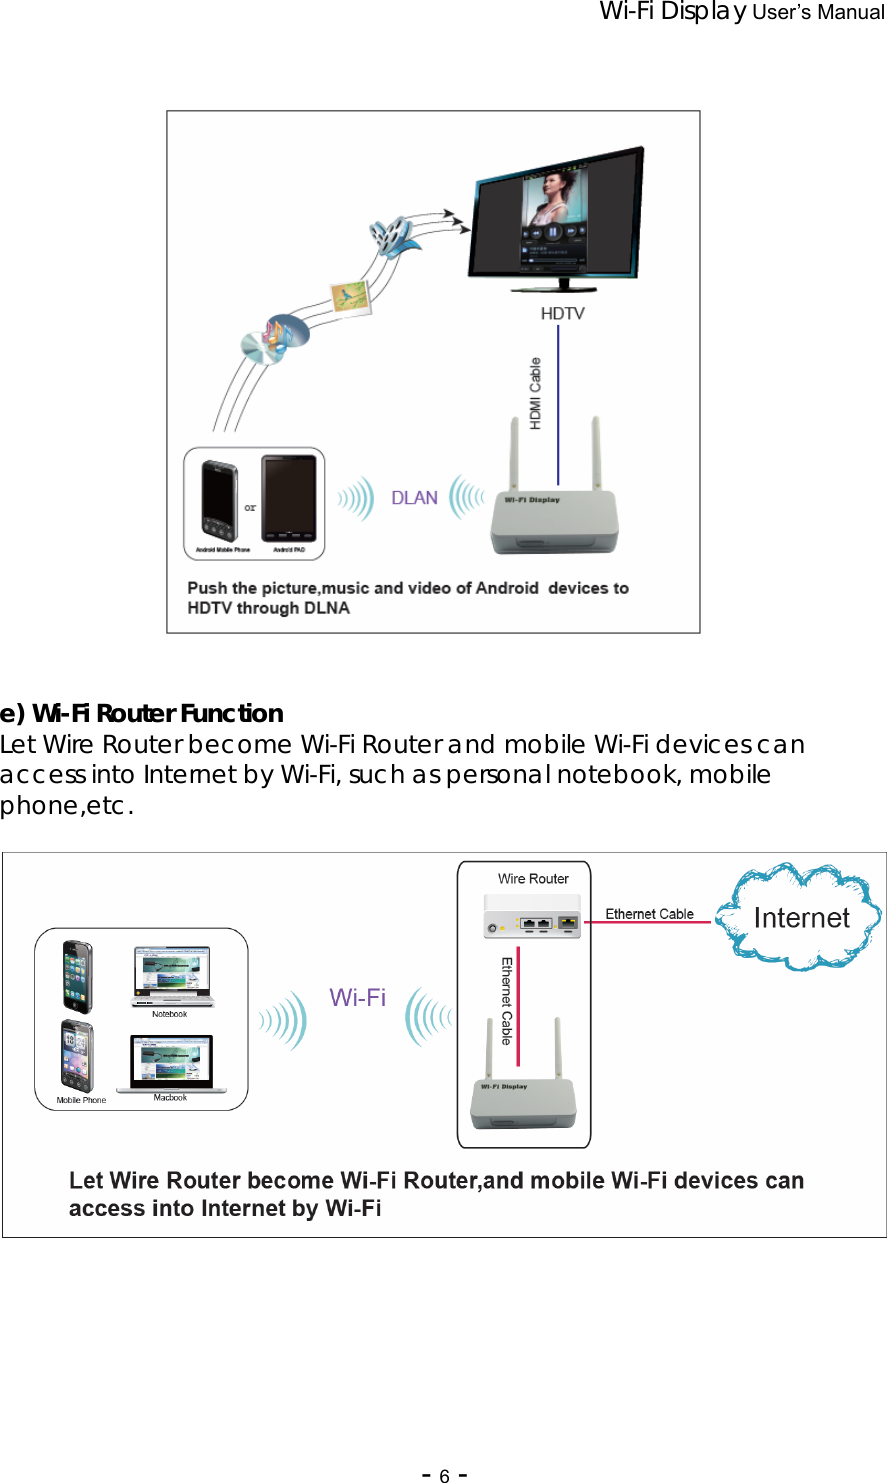 Wi-Fi Display User’s Manual - 6 -                    e) Wi-Fi Router Function Let Wire Router become Wi-Fi Router and mobile Wi-Fi devices can access into Internet by Wi-Fi, such as personal notebook, mobile phone,etc.     